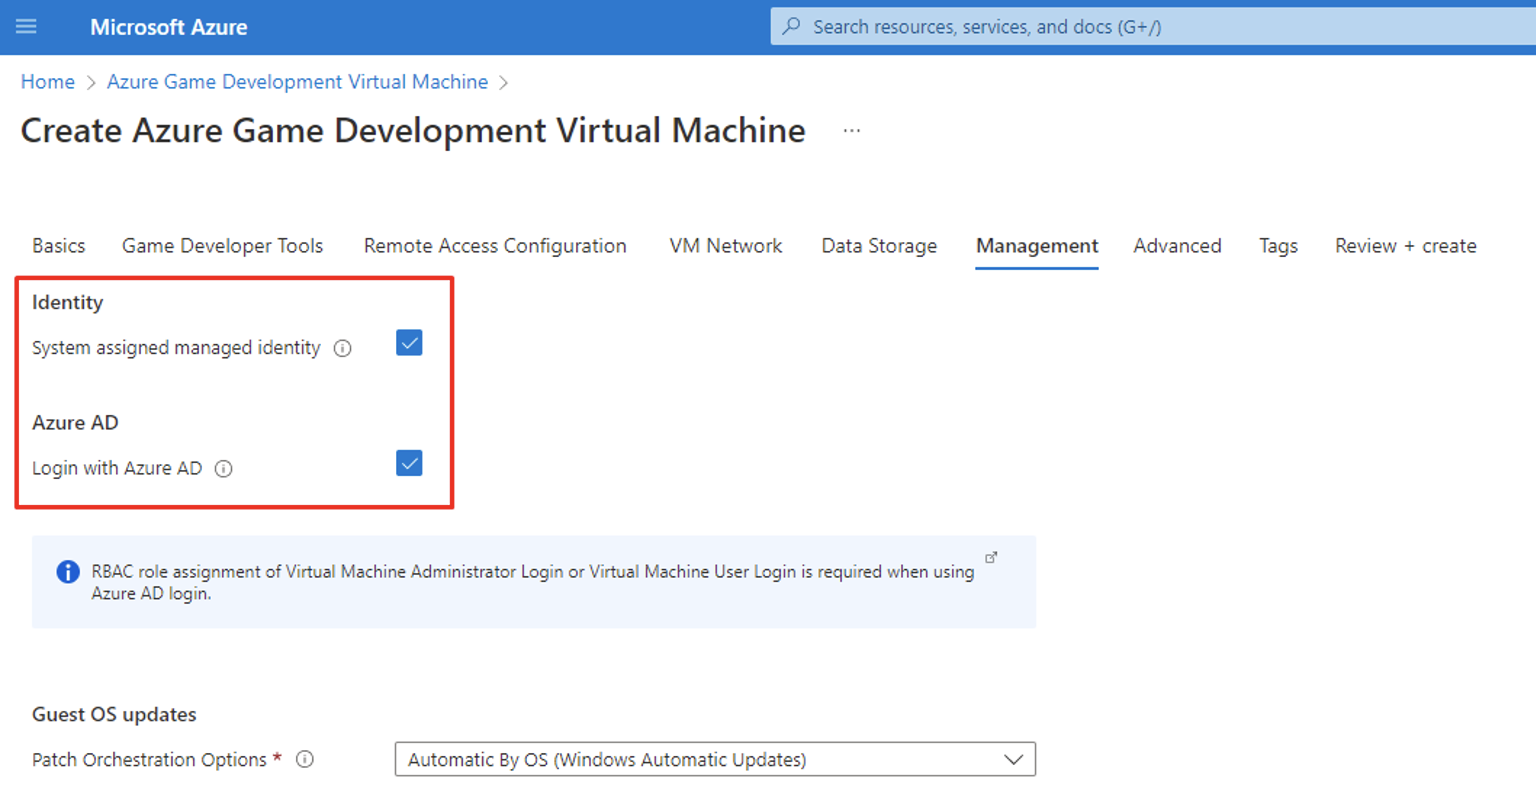 Screenshot showing options selected for managed identity and Azure AD